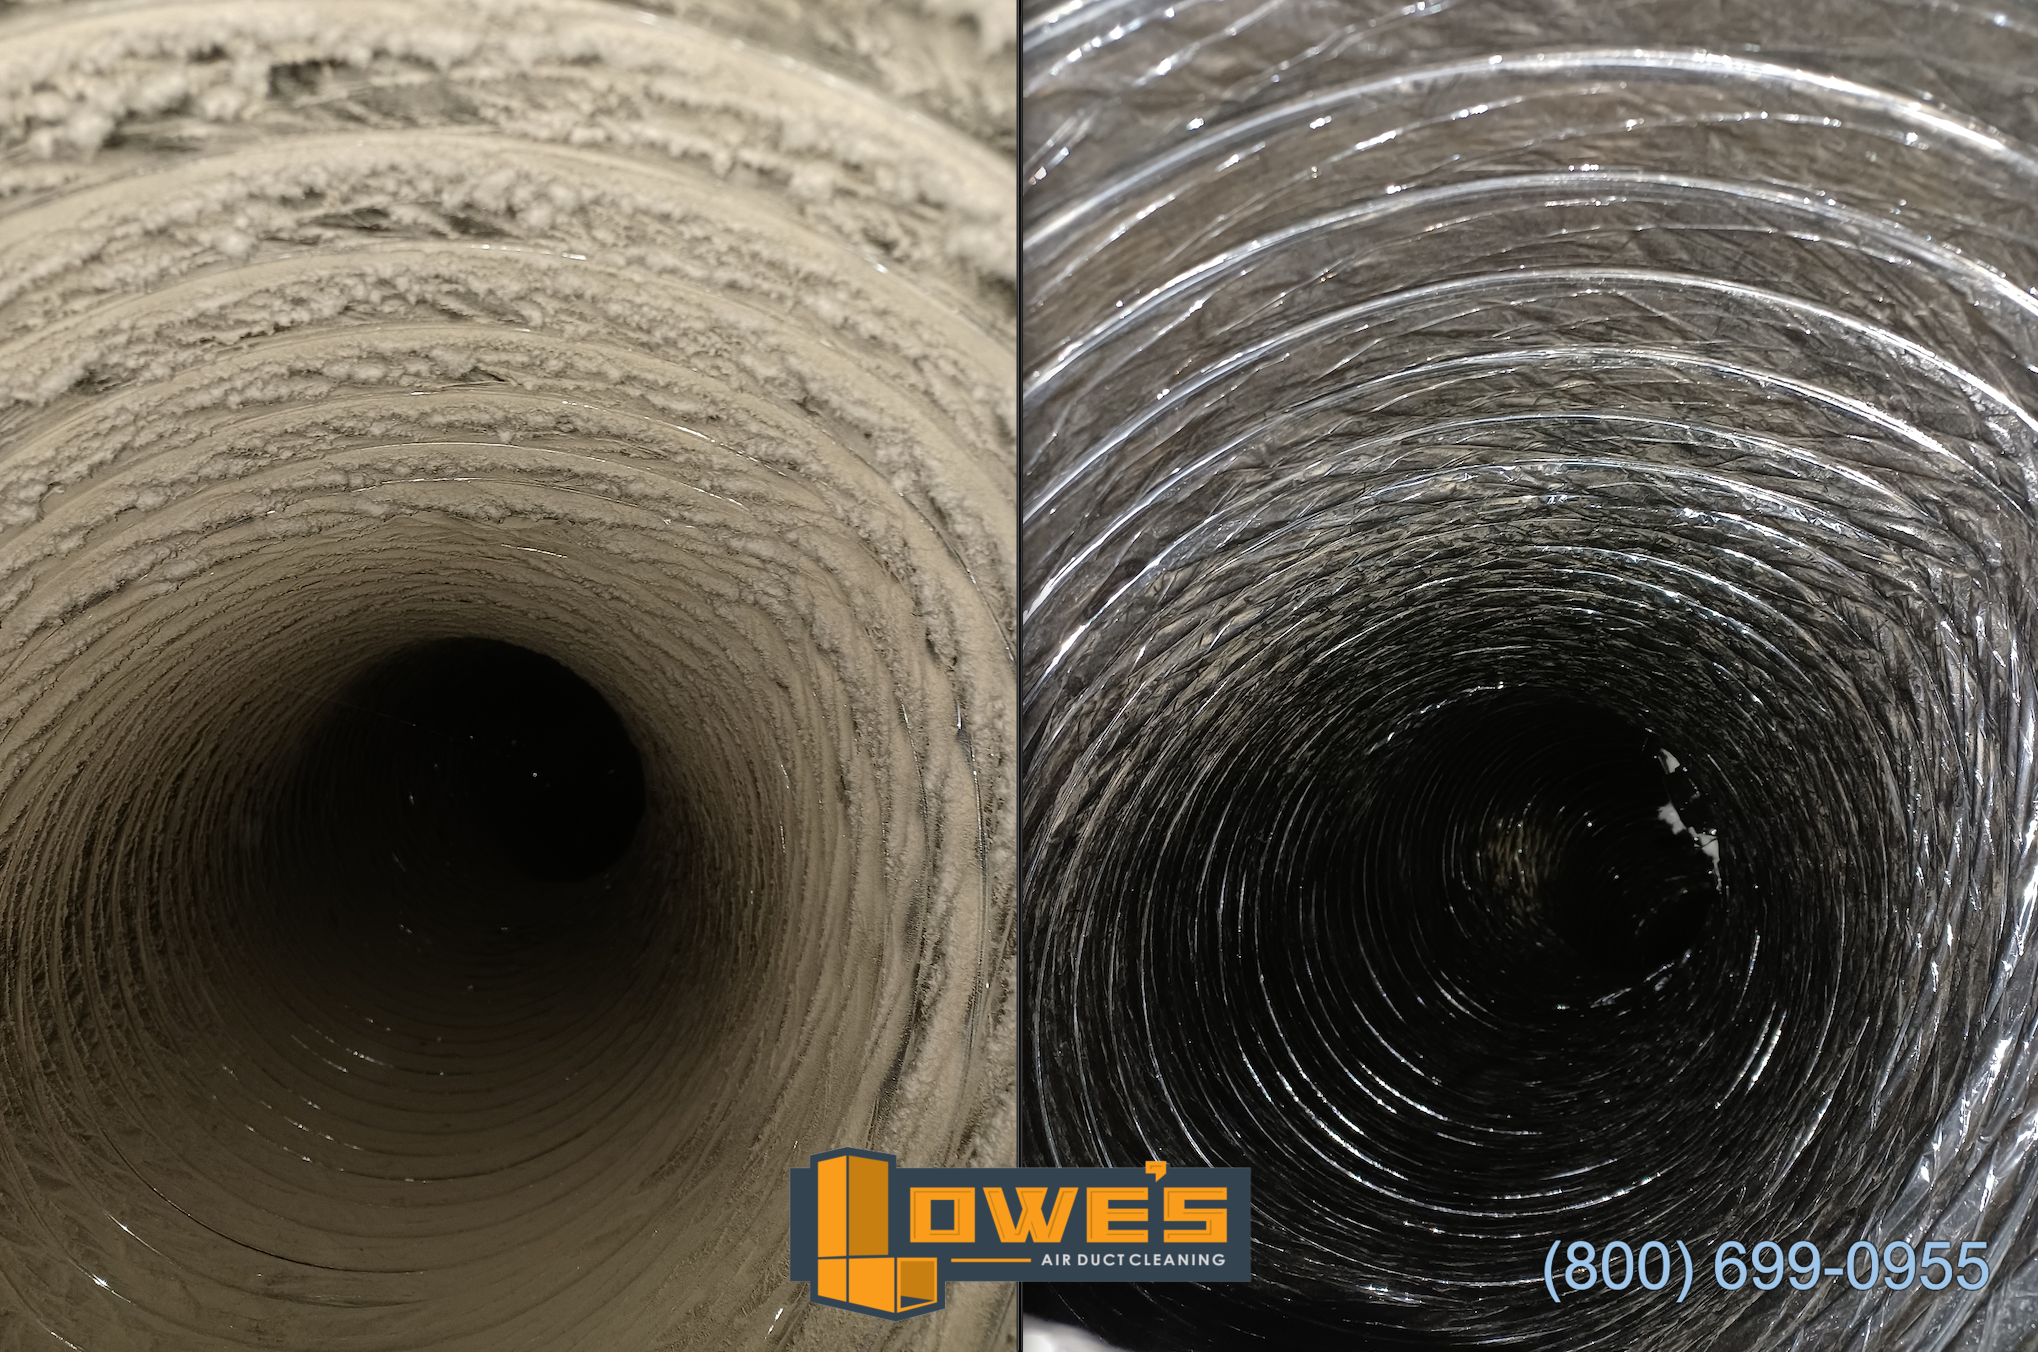 Lowe's Air Duct Cleaning Annapolis (443)921-9421